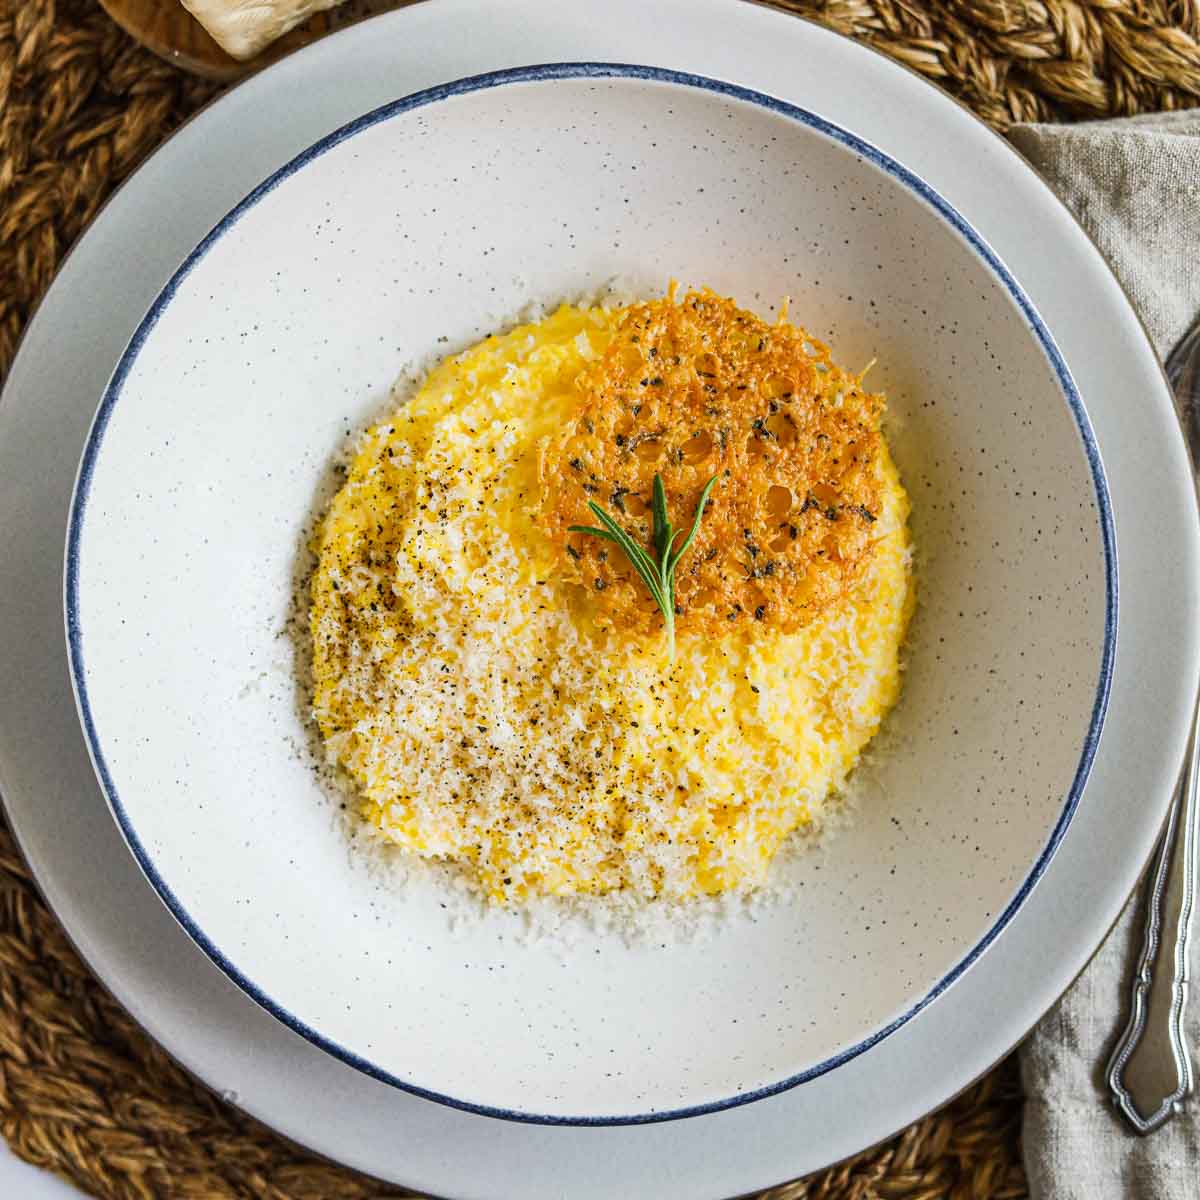 Creamy polenta with parmigiano-reggiano, rosemary, and frico (montasio cheese crisps) in a bowl.